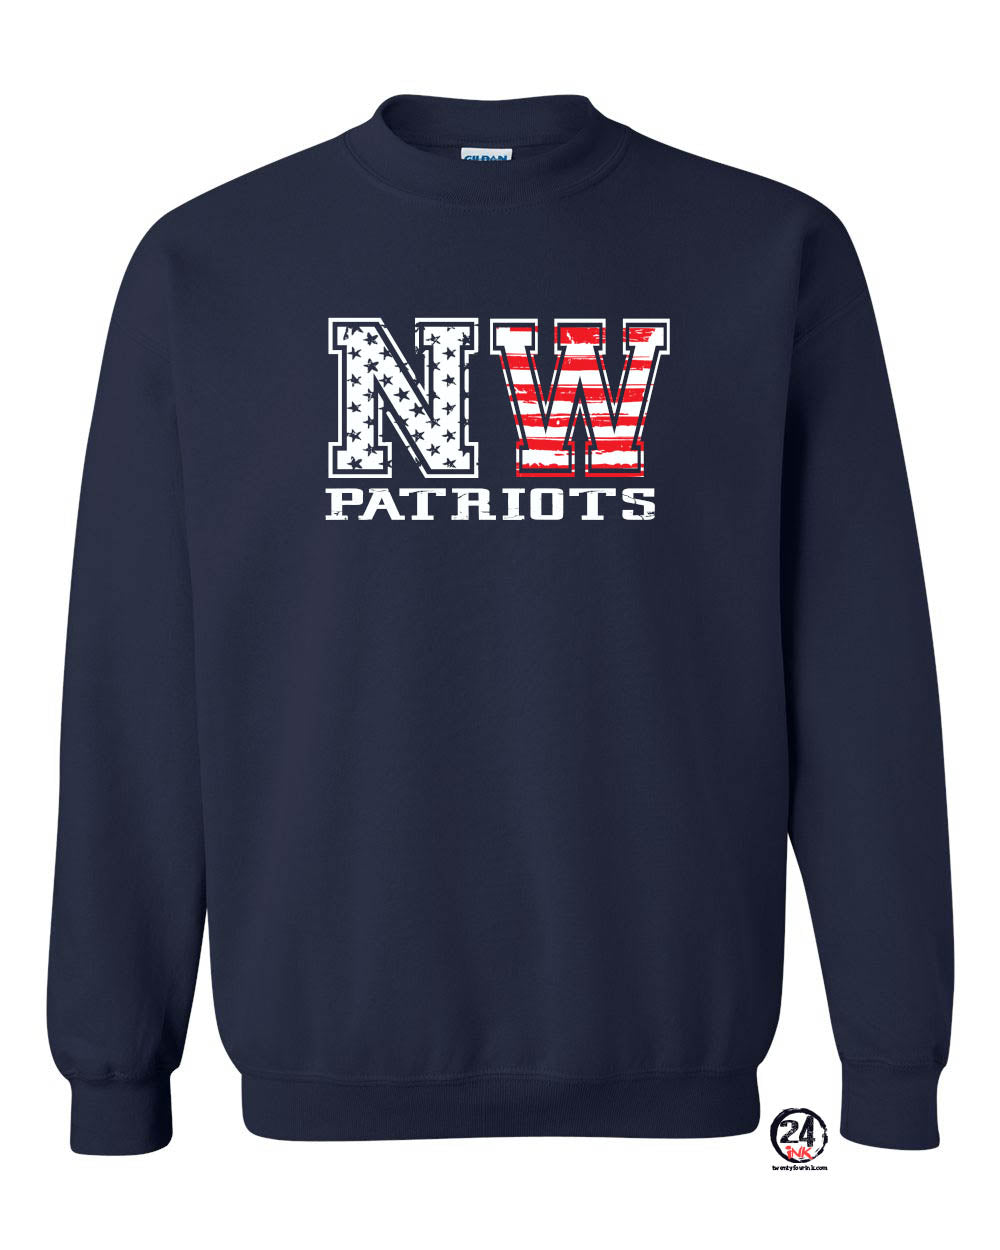 NW Stars and Stripes non hooded sweatshirt